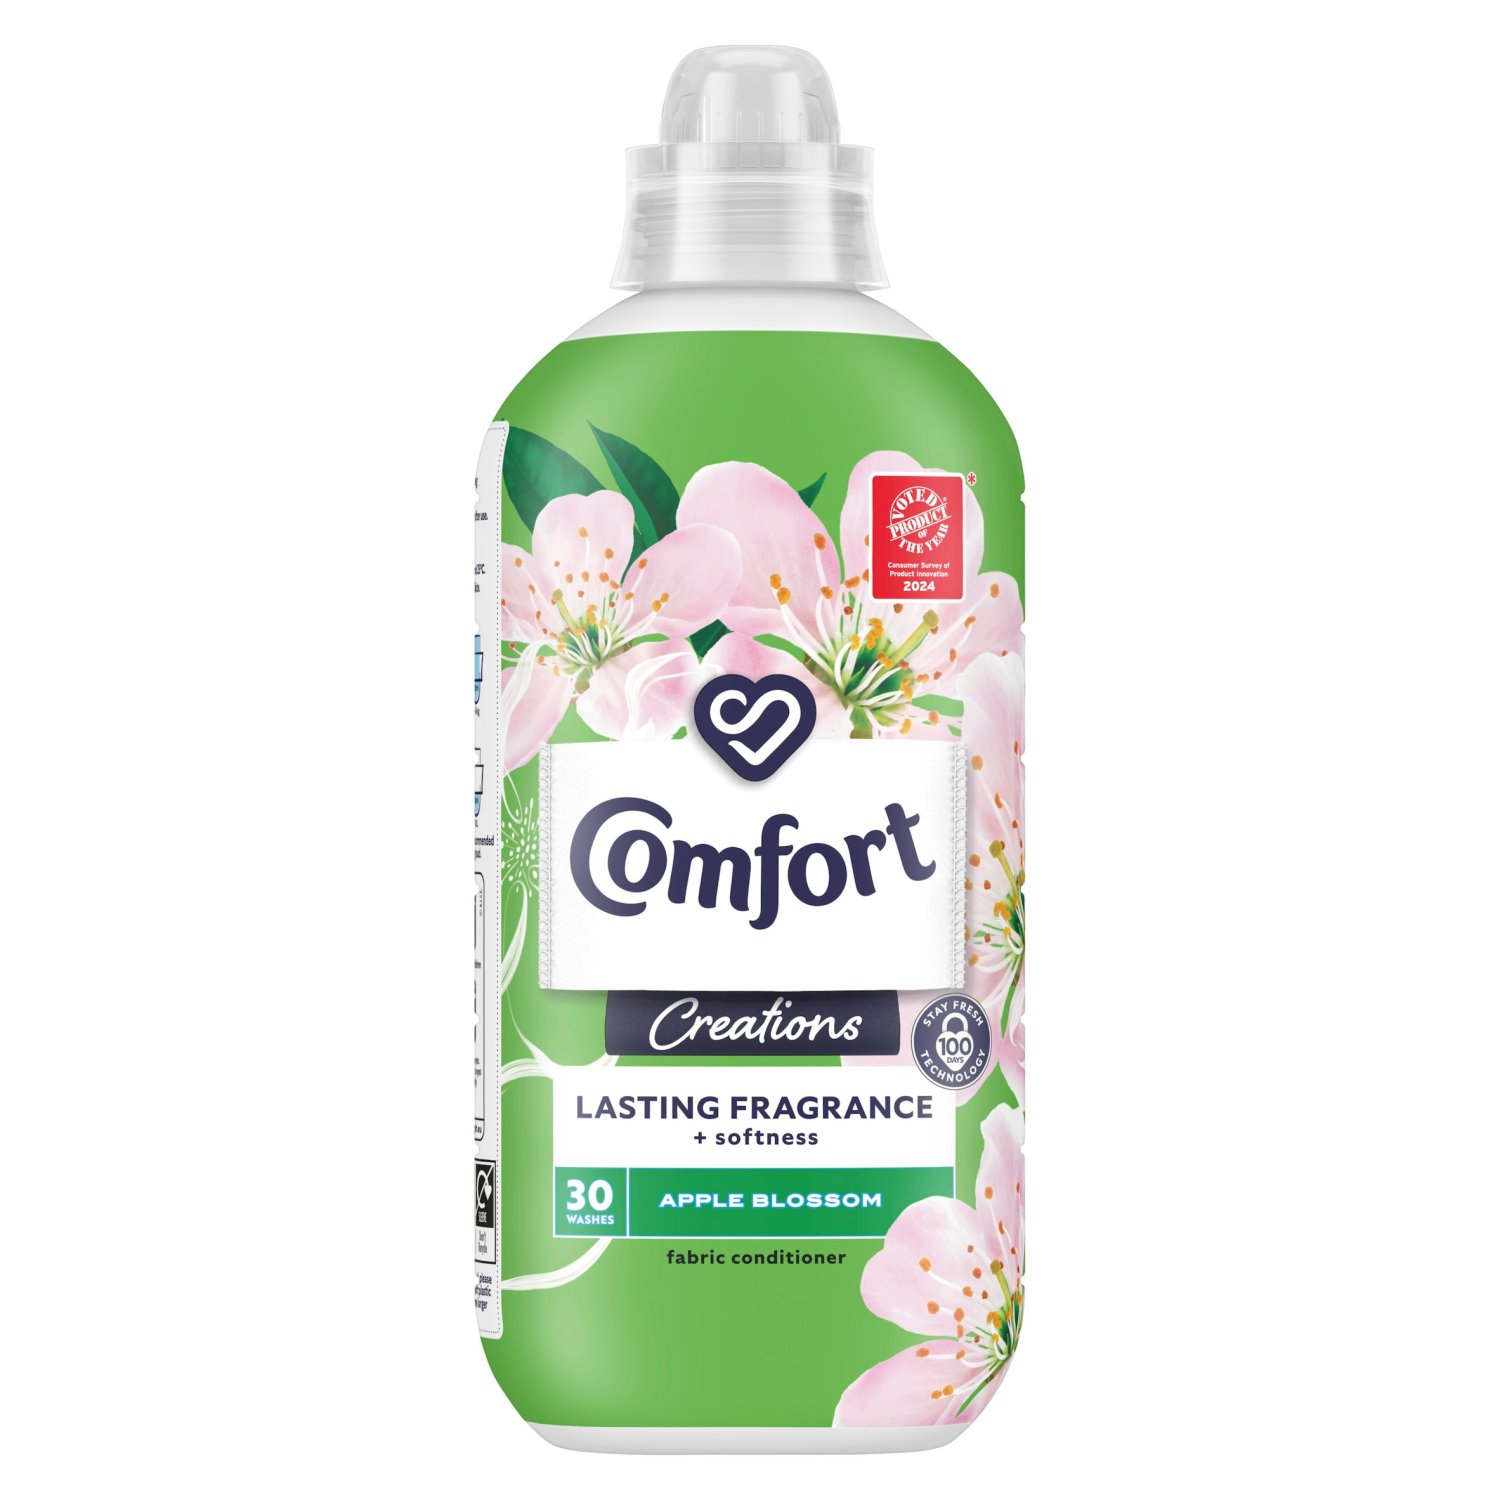 Comfort Creations Fabric Conditioner Apple Blossom 30 Washes (900 ml)